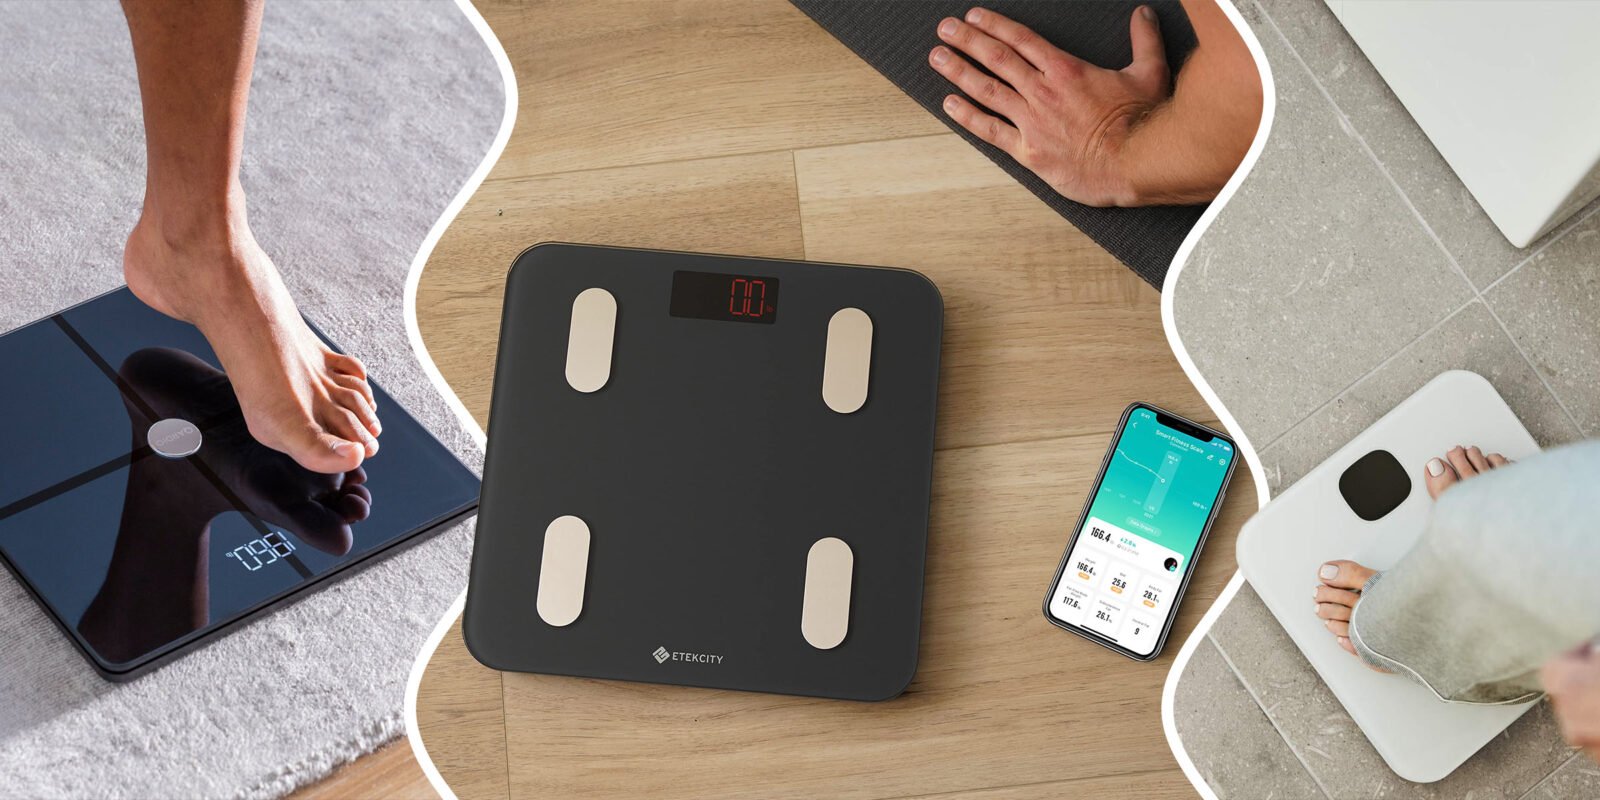 This collage showcases the best smart scales, including the Eufy Smart Scale and the Etekcity Digital Scale, illustrating their ease of use and the smart features that help maintain a healthy lifestyle.